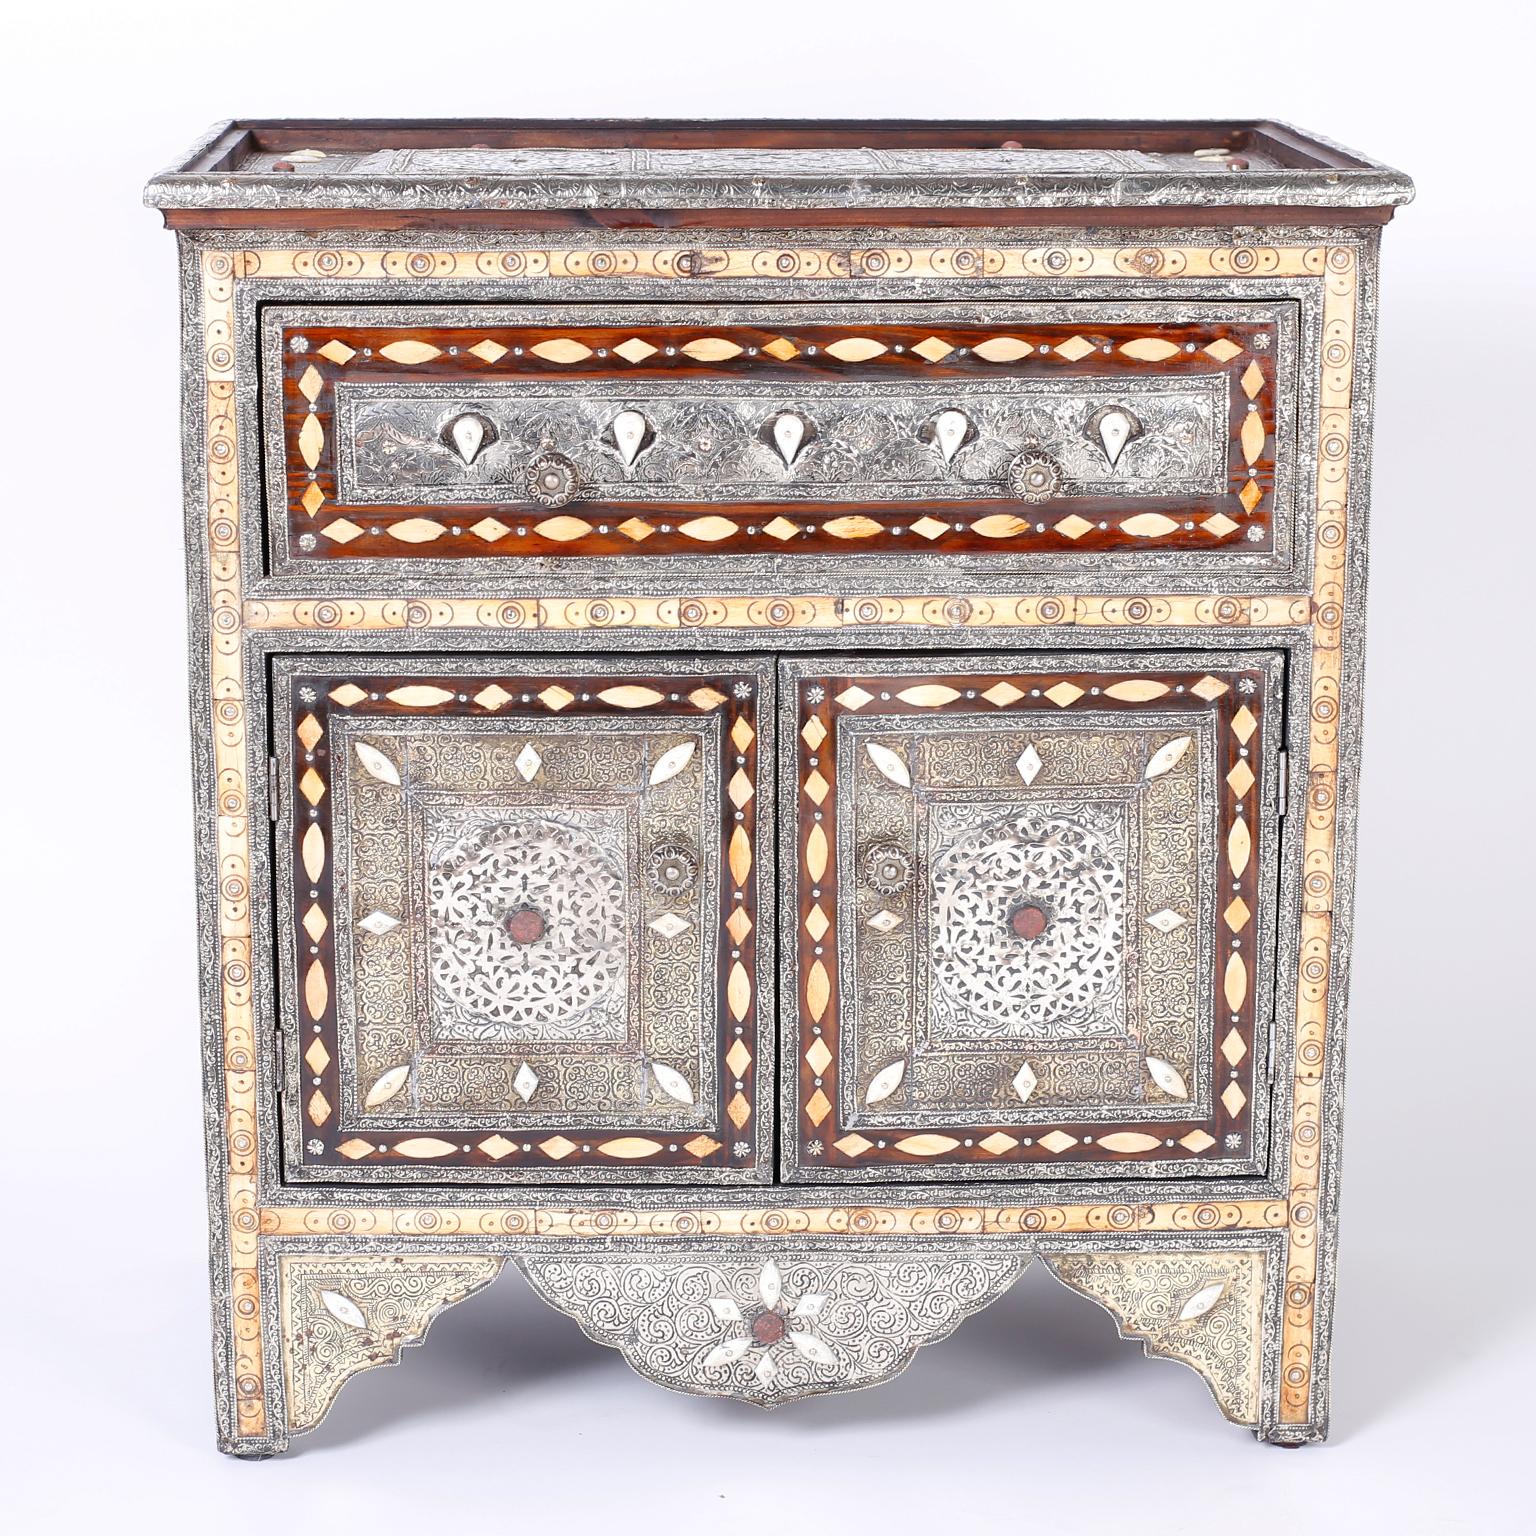 An enchanting Turkish cabinet or stand showing Syrian influences with elaborate hand-hammered floral designs on tin over a hardwood frame. Featuring semi precious stones, bone inlays, stick and ball panels and plenty of storage with a drawer and two